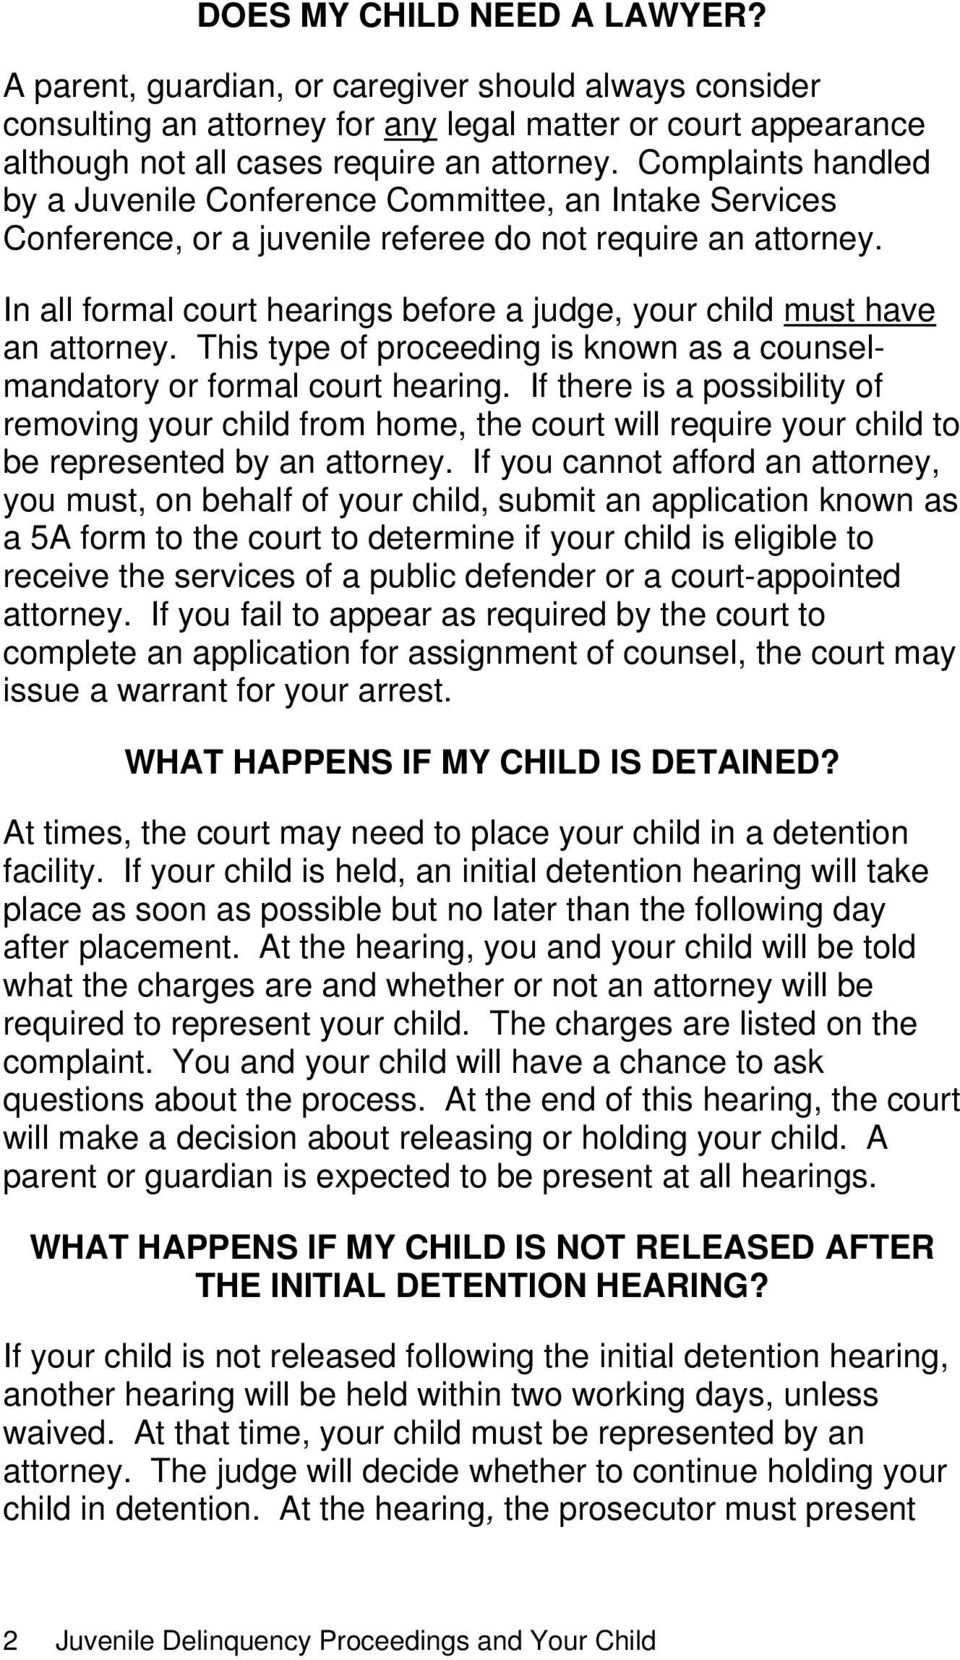 In all formal court hearings before a judge, your child must have an attorney. This type of proceeding is known as a counselmandatory or formal court hearing.